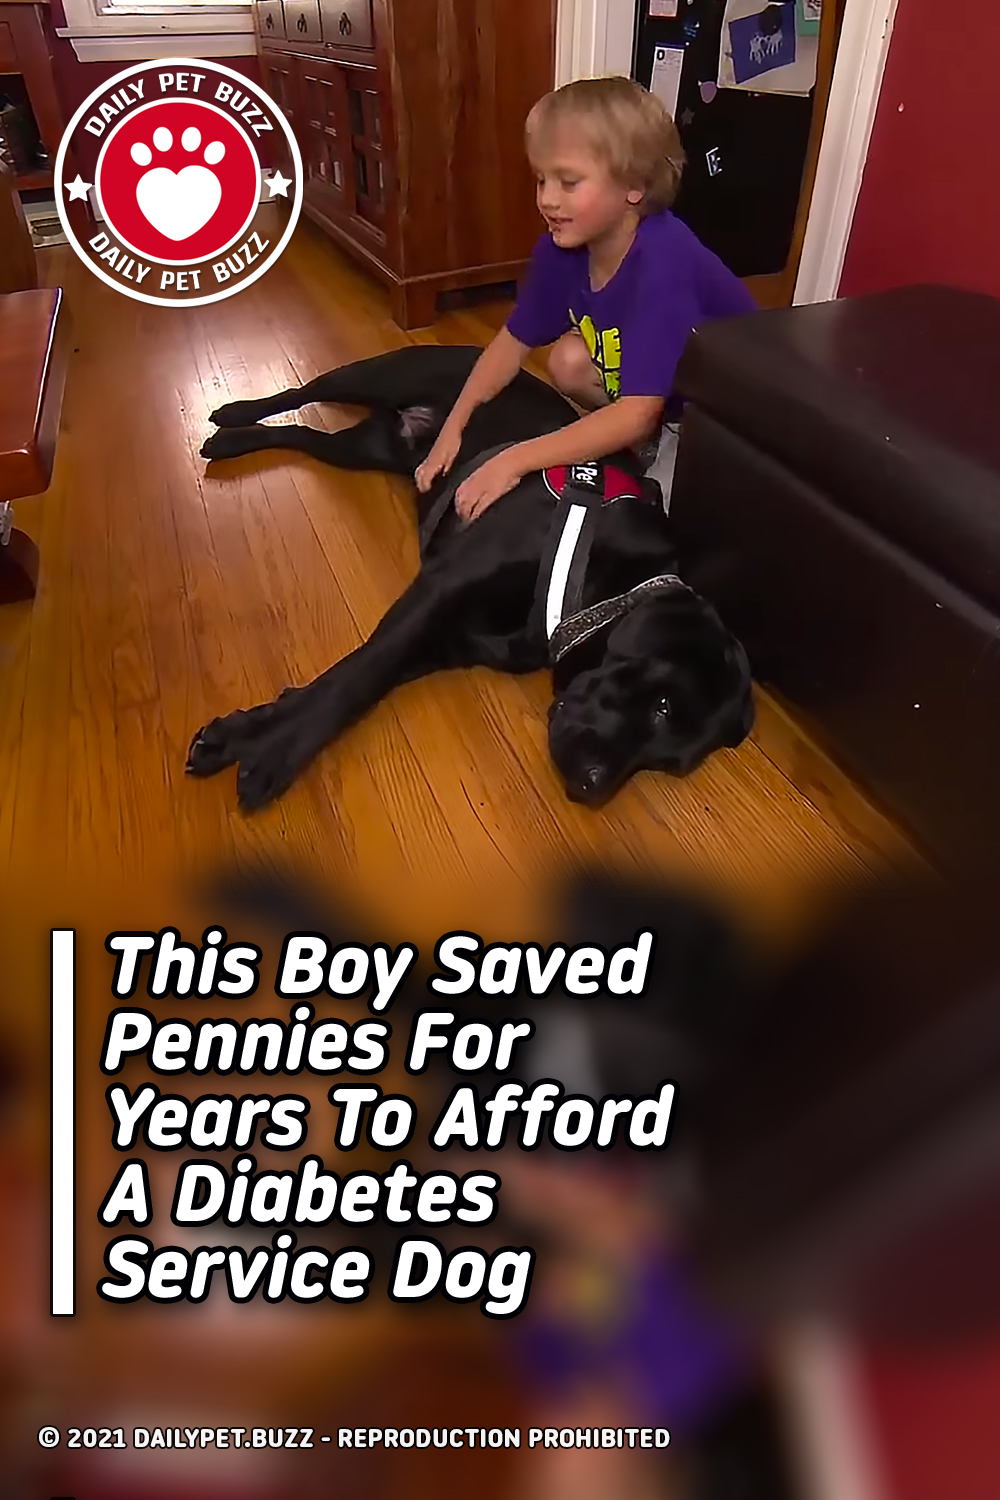 This Boy Saved Pennies For Years To Afford A Diabetes Service Dog